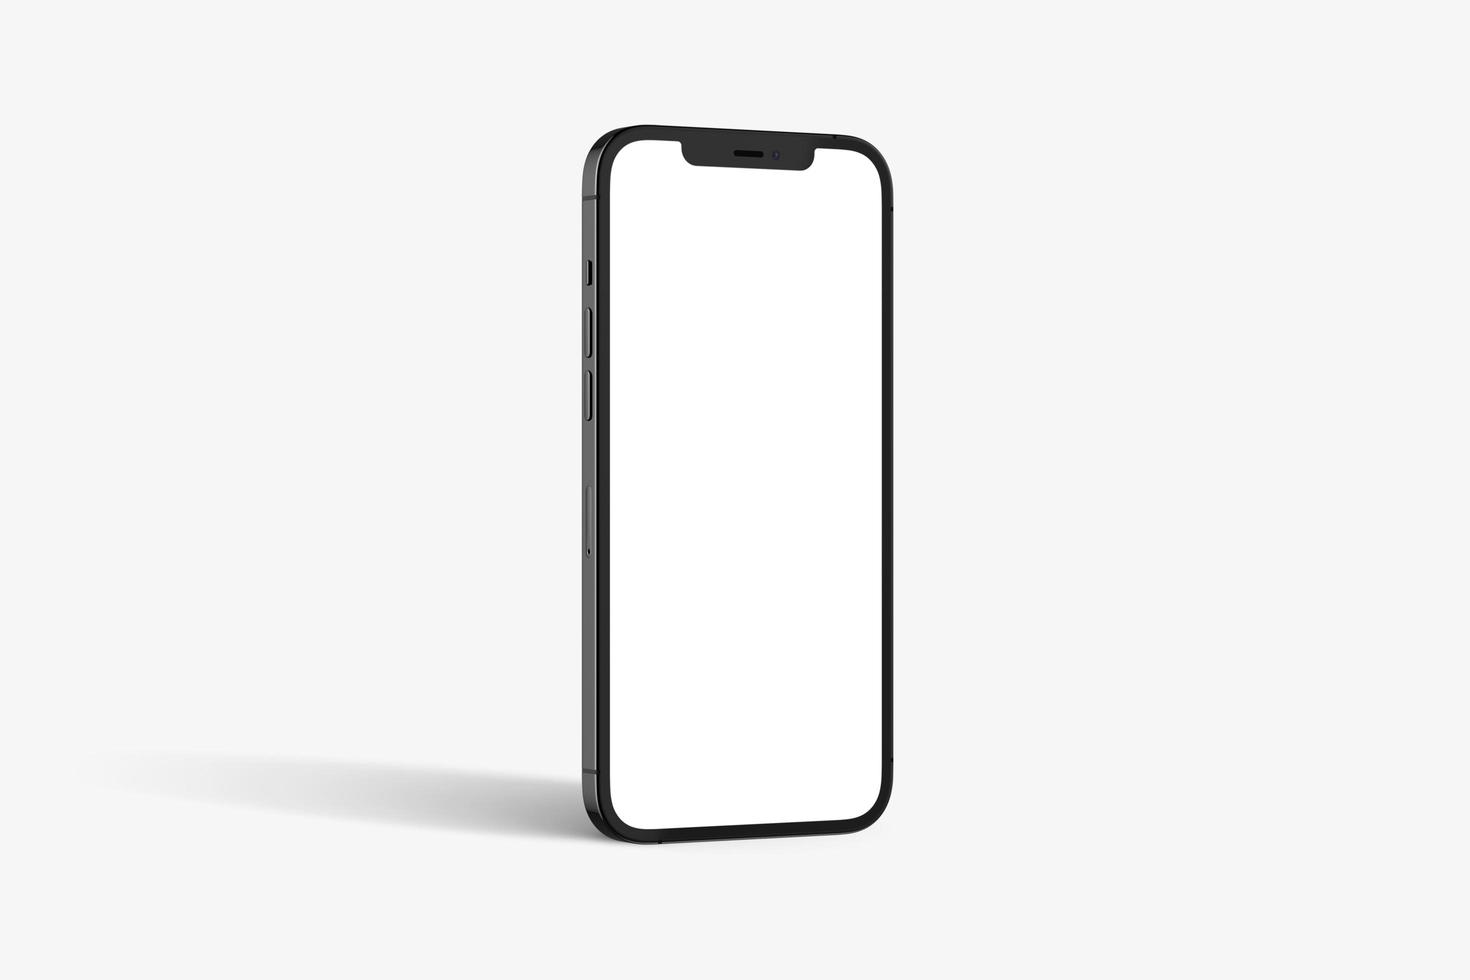 Black modern smartphone mockup. Mobile smart phone technology front blank screen studio shot isolated on over white background with clipping paths for Phone and for Screen. photo